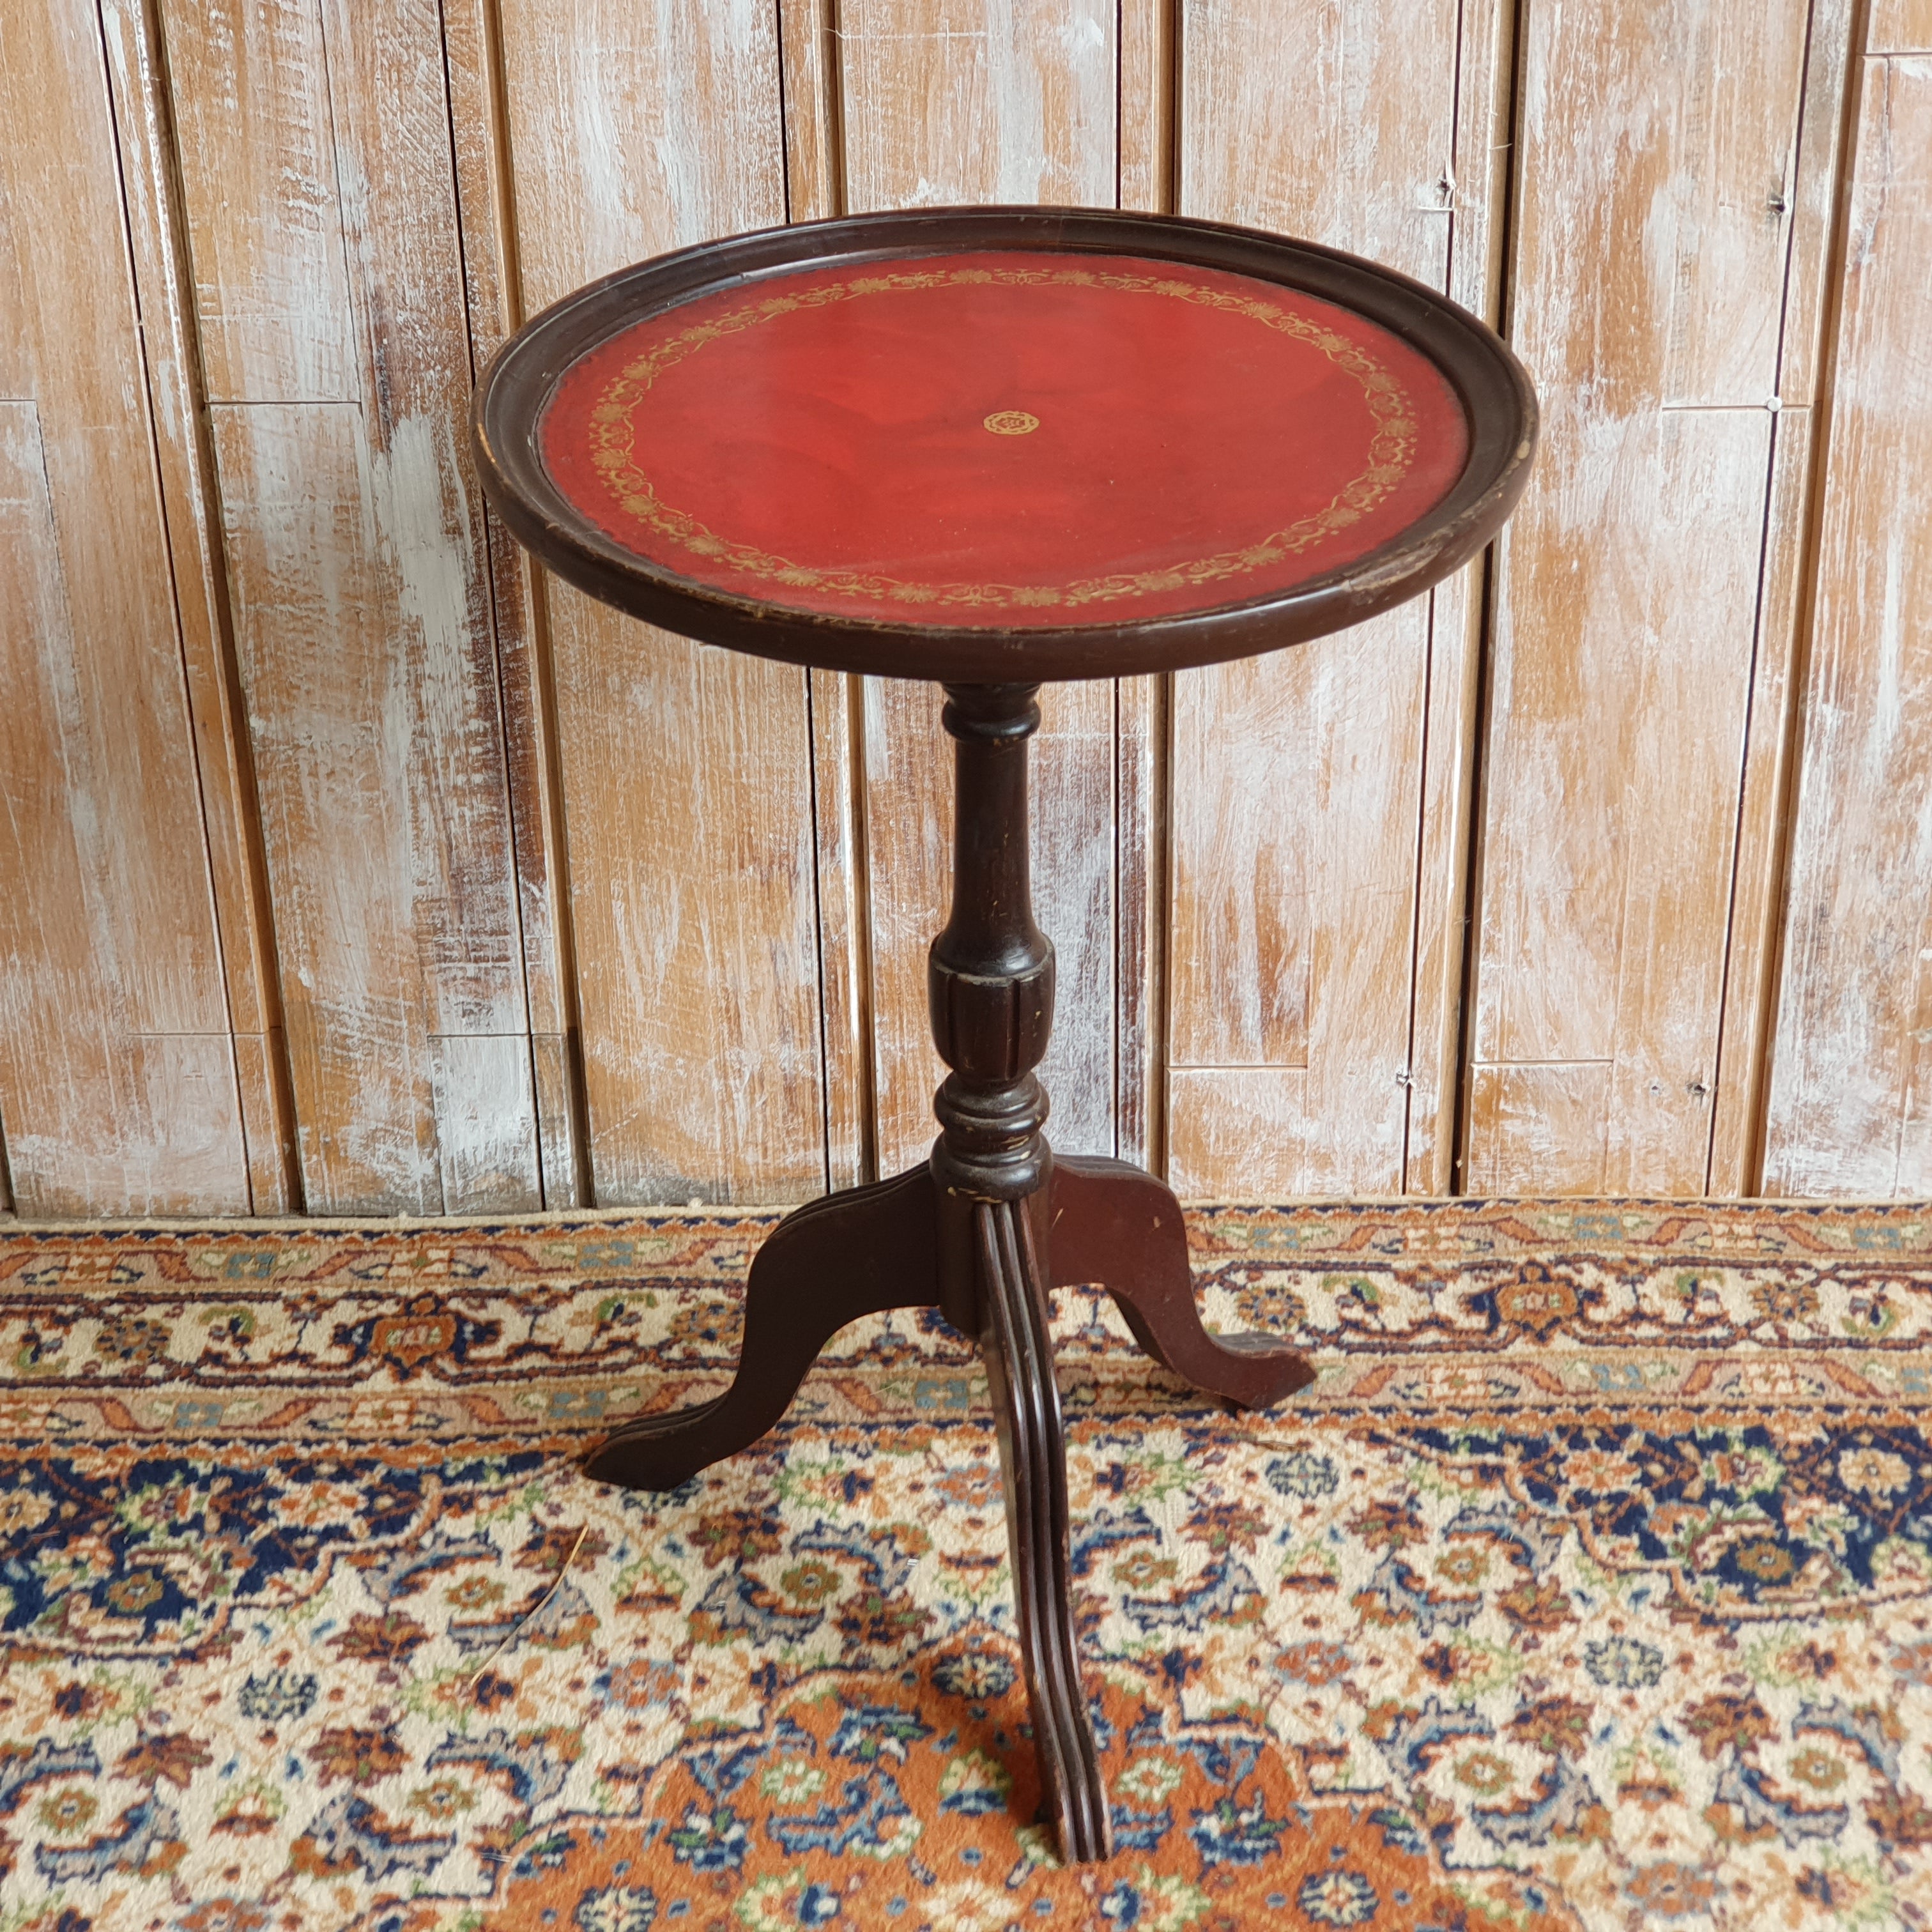 Vintage Red Leather Top Table